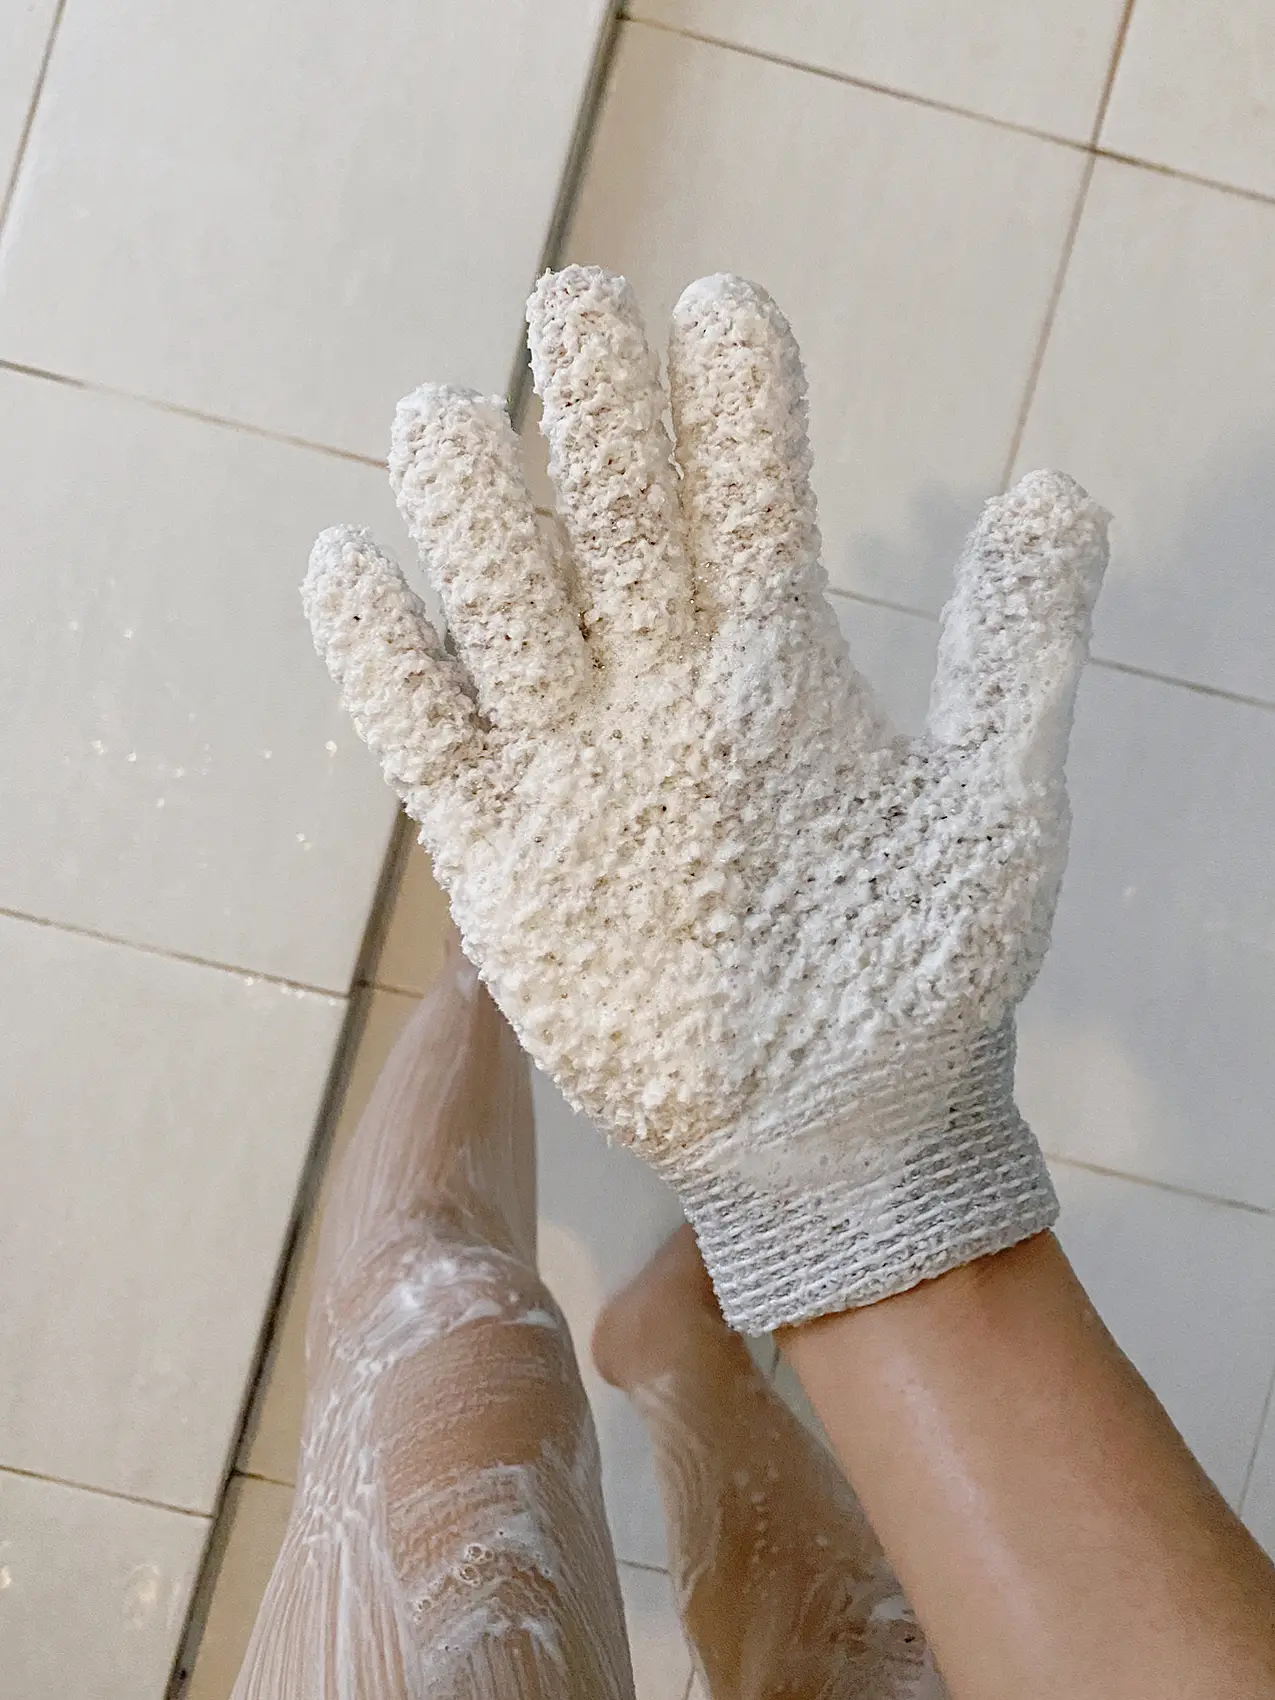 How to Wash Your Gloves and Keep Them Clean - Watson Gloves